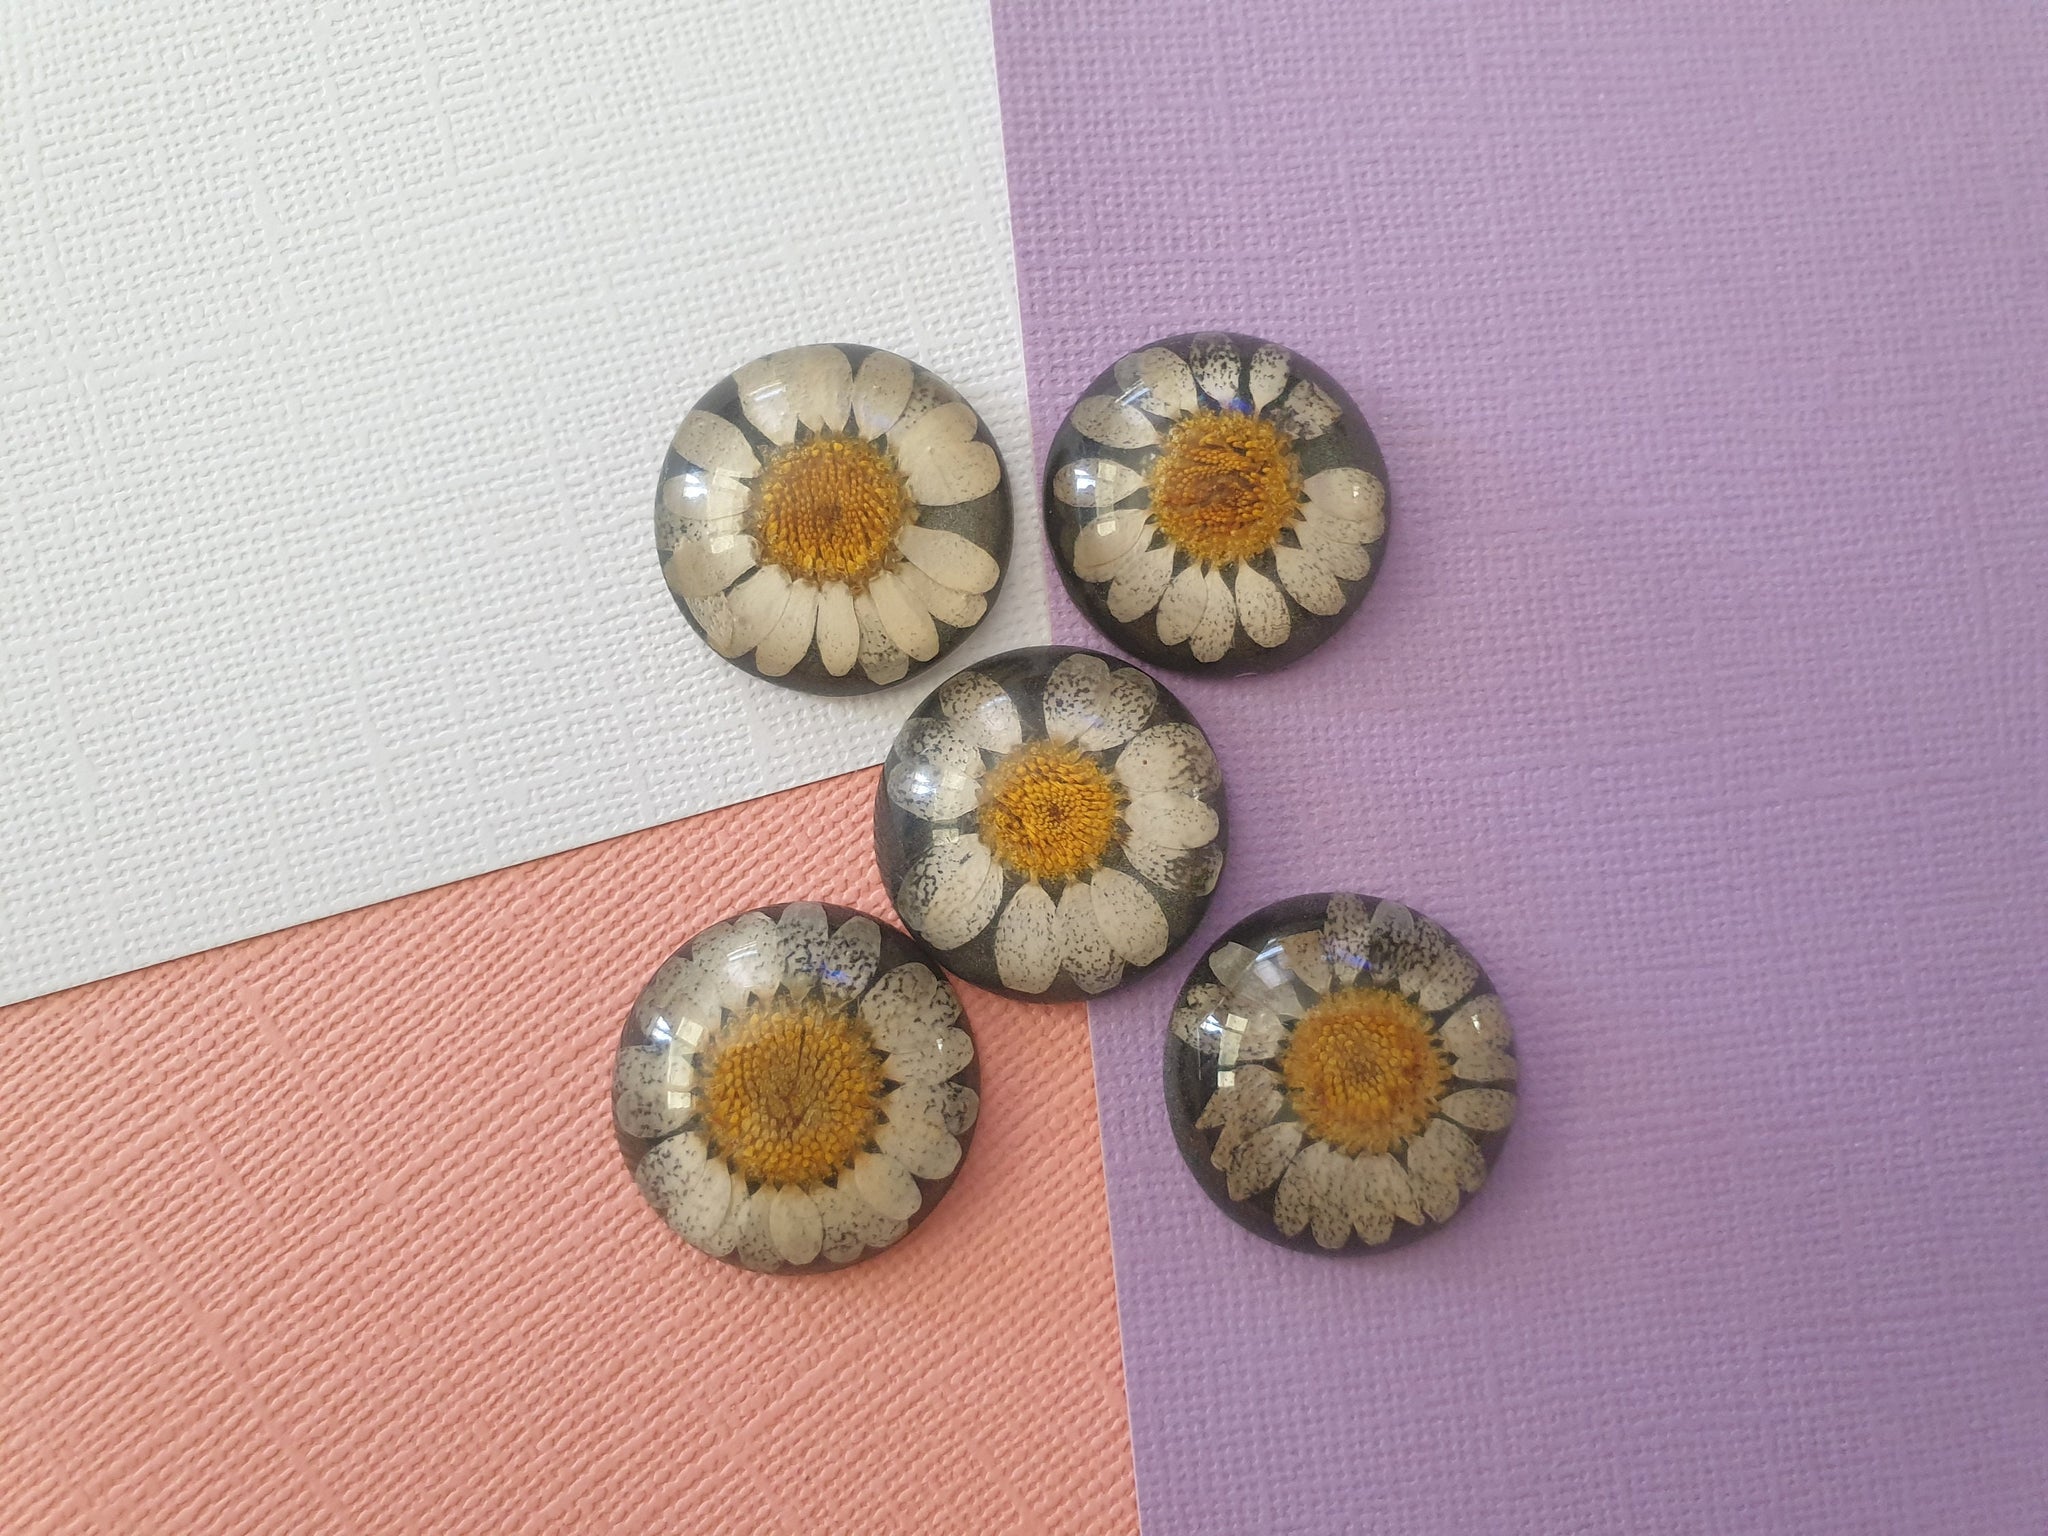 5pcs 25mm Natural Dried Flowers Flat Back Resin Cabochons Cameo, Jewellery supplies, findings, wholesale australia, DIY necklace, bracelet